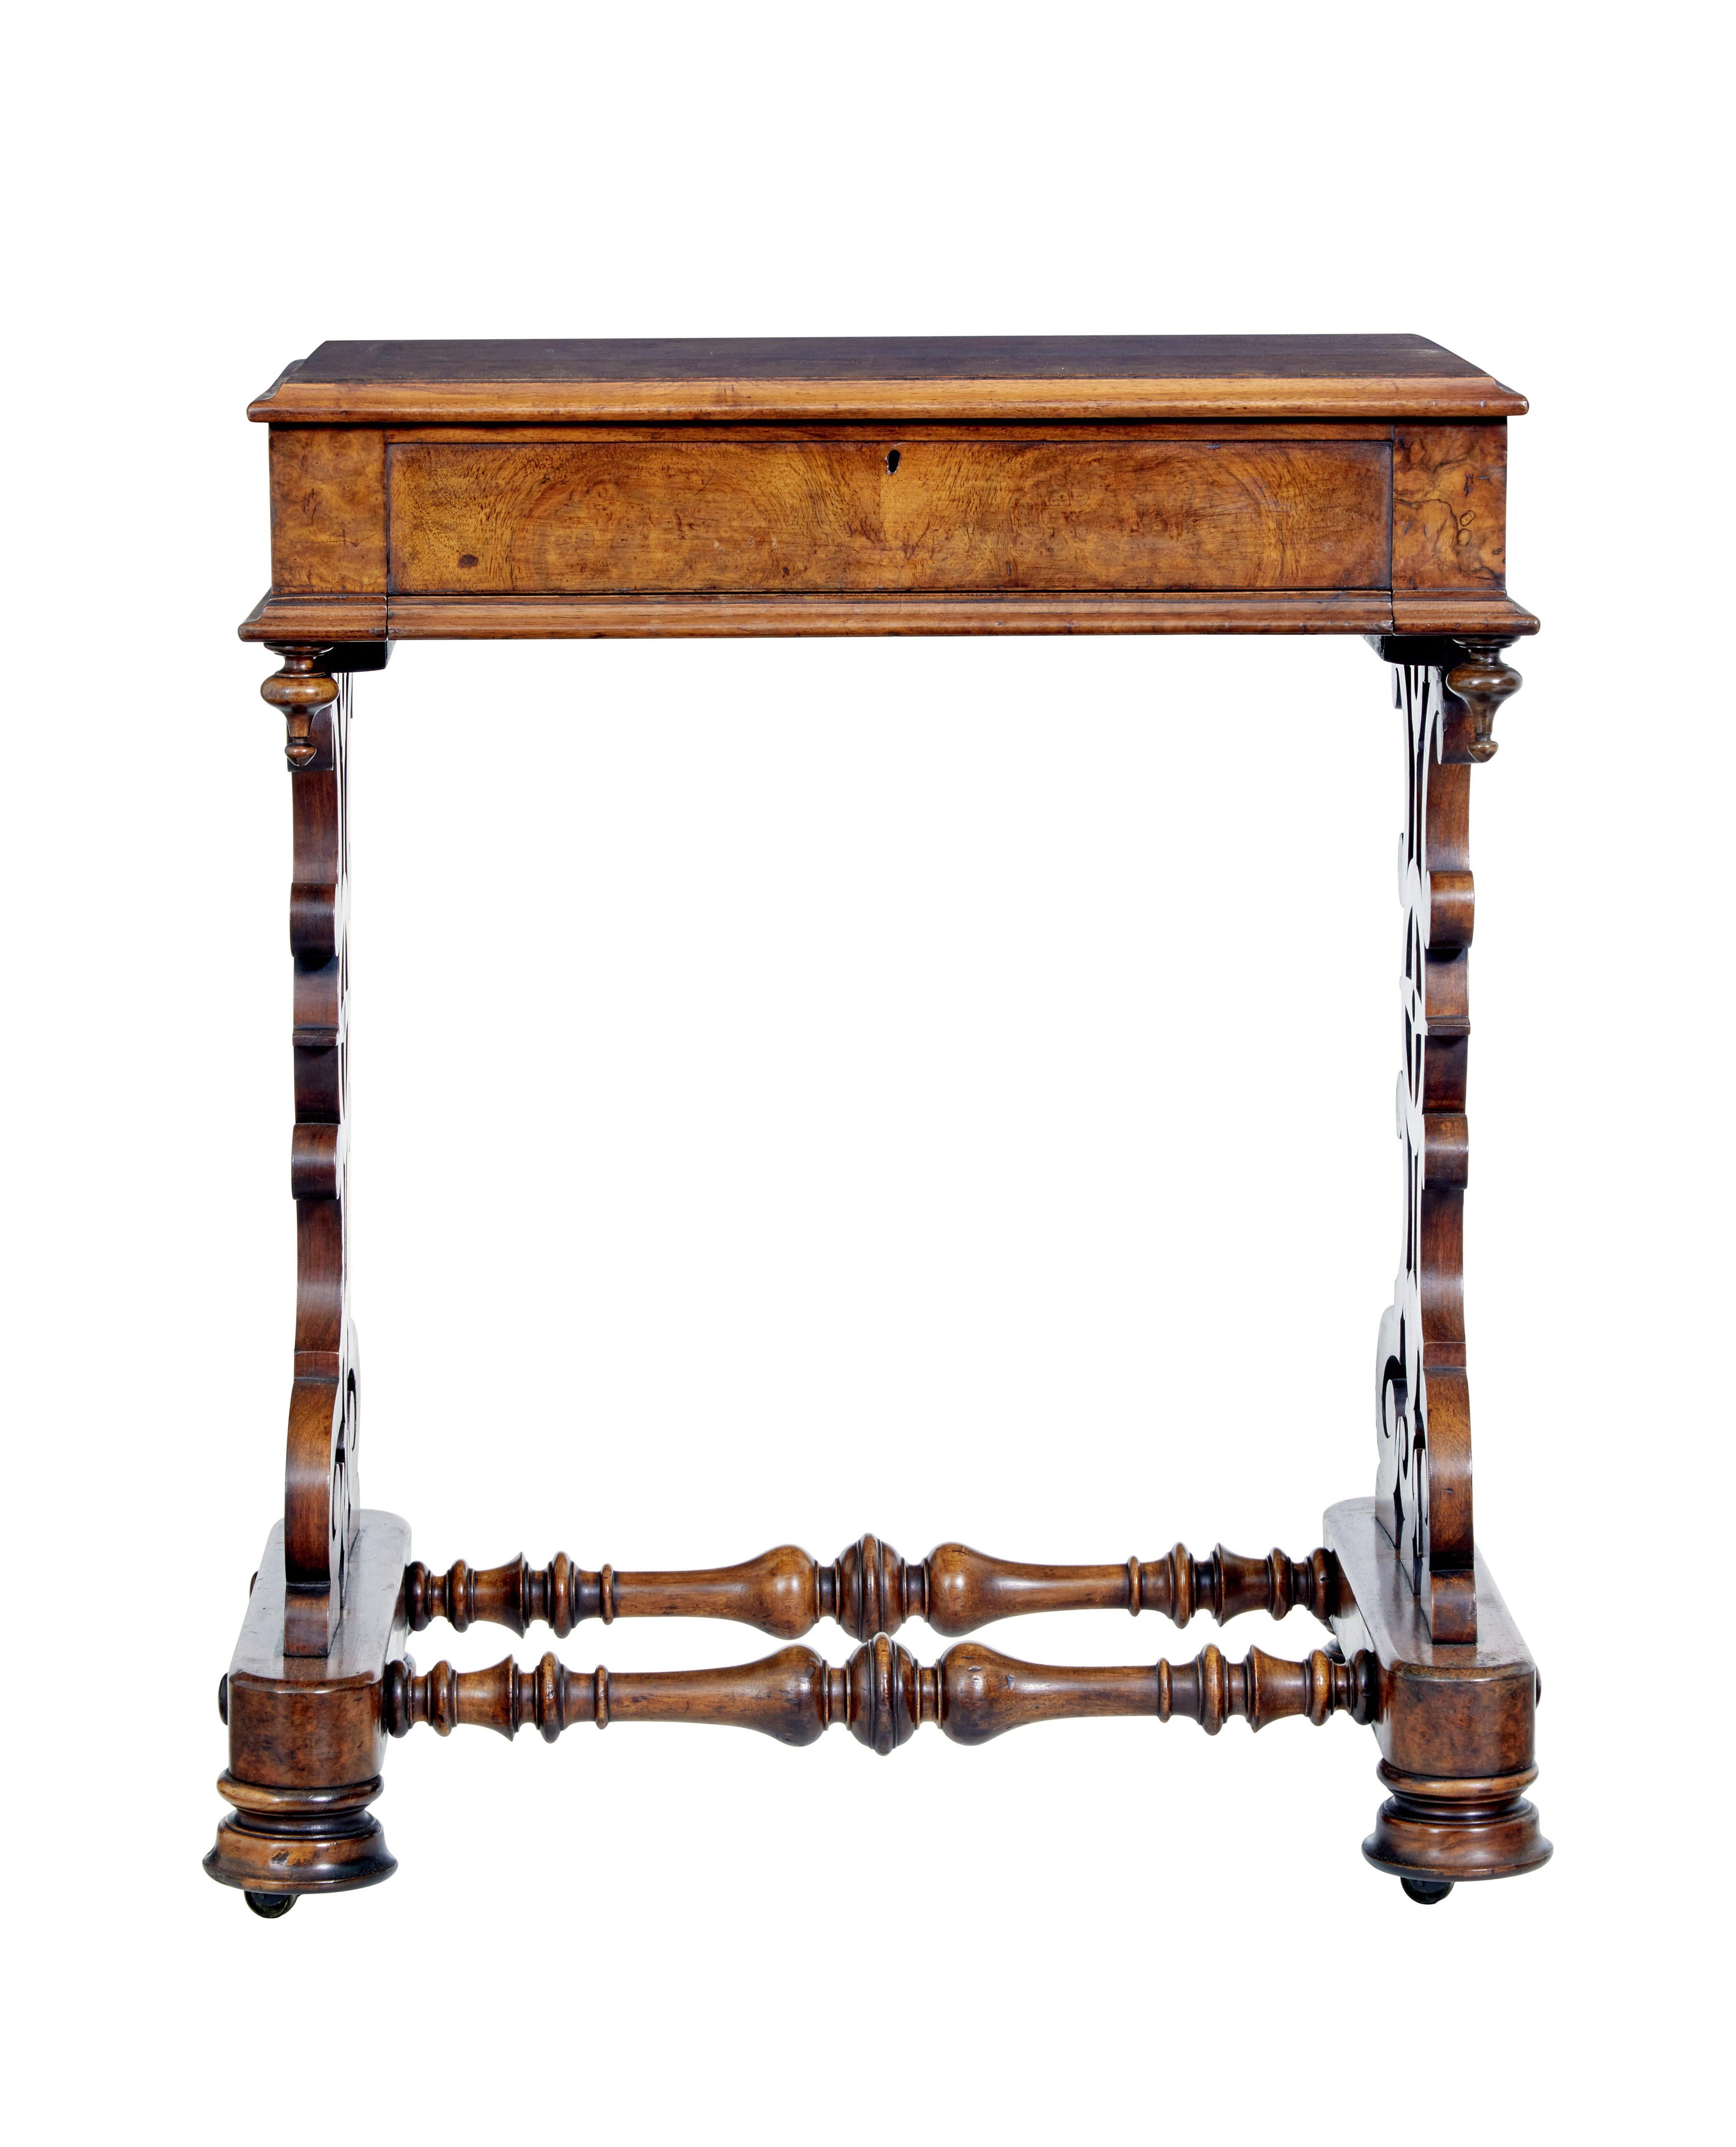 19th century high Victorian burr walnut occasional table circa 1870.

Fine quality high Victorian ladies work table.  Burr walnut top of rich colour and patina, lid opens to reveal a partitioned fretwork satinwood interior which cover the various